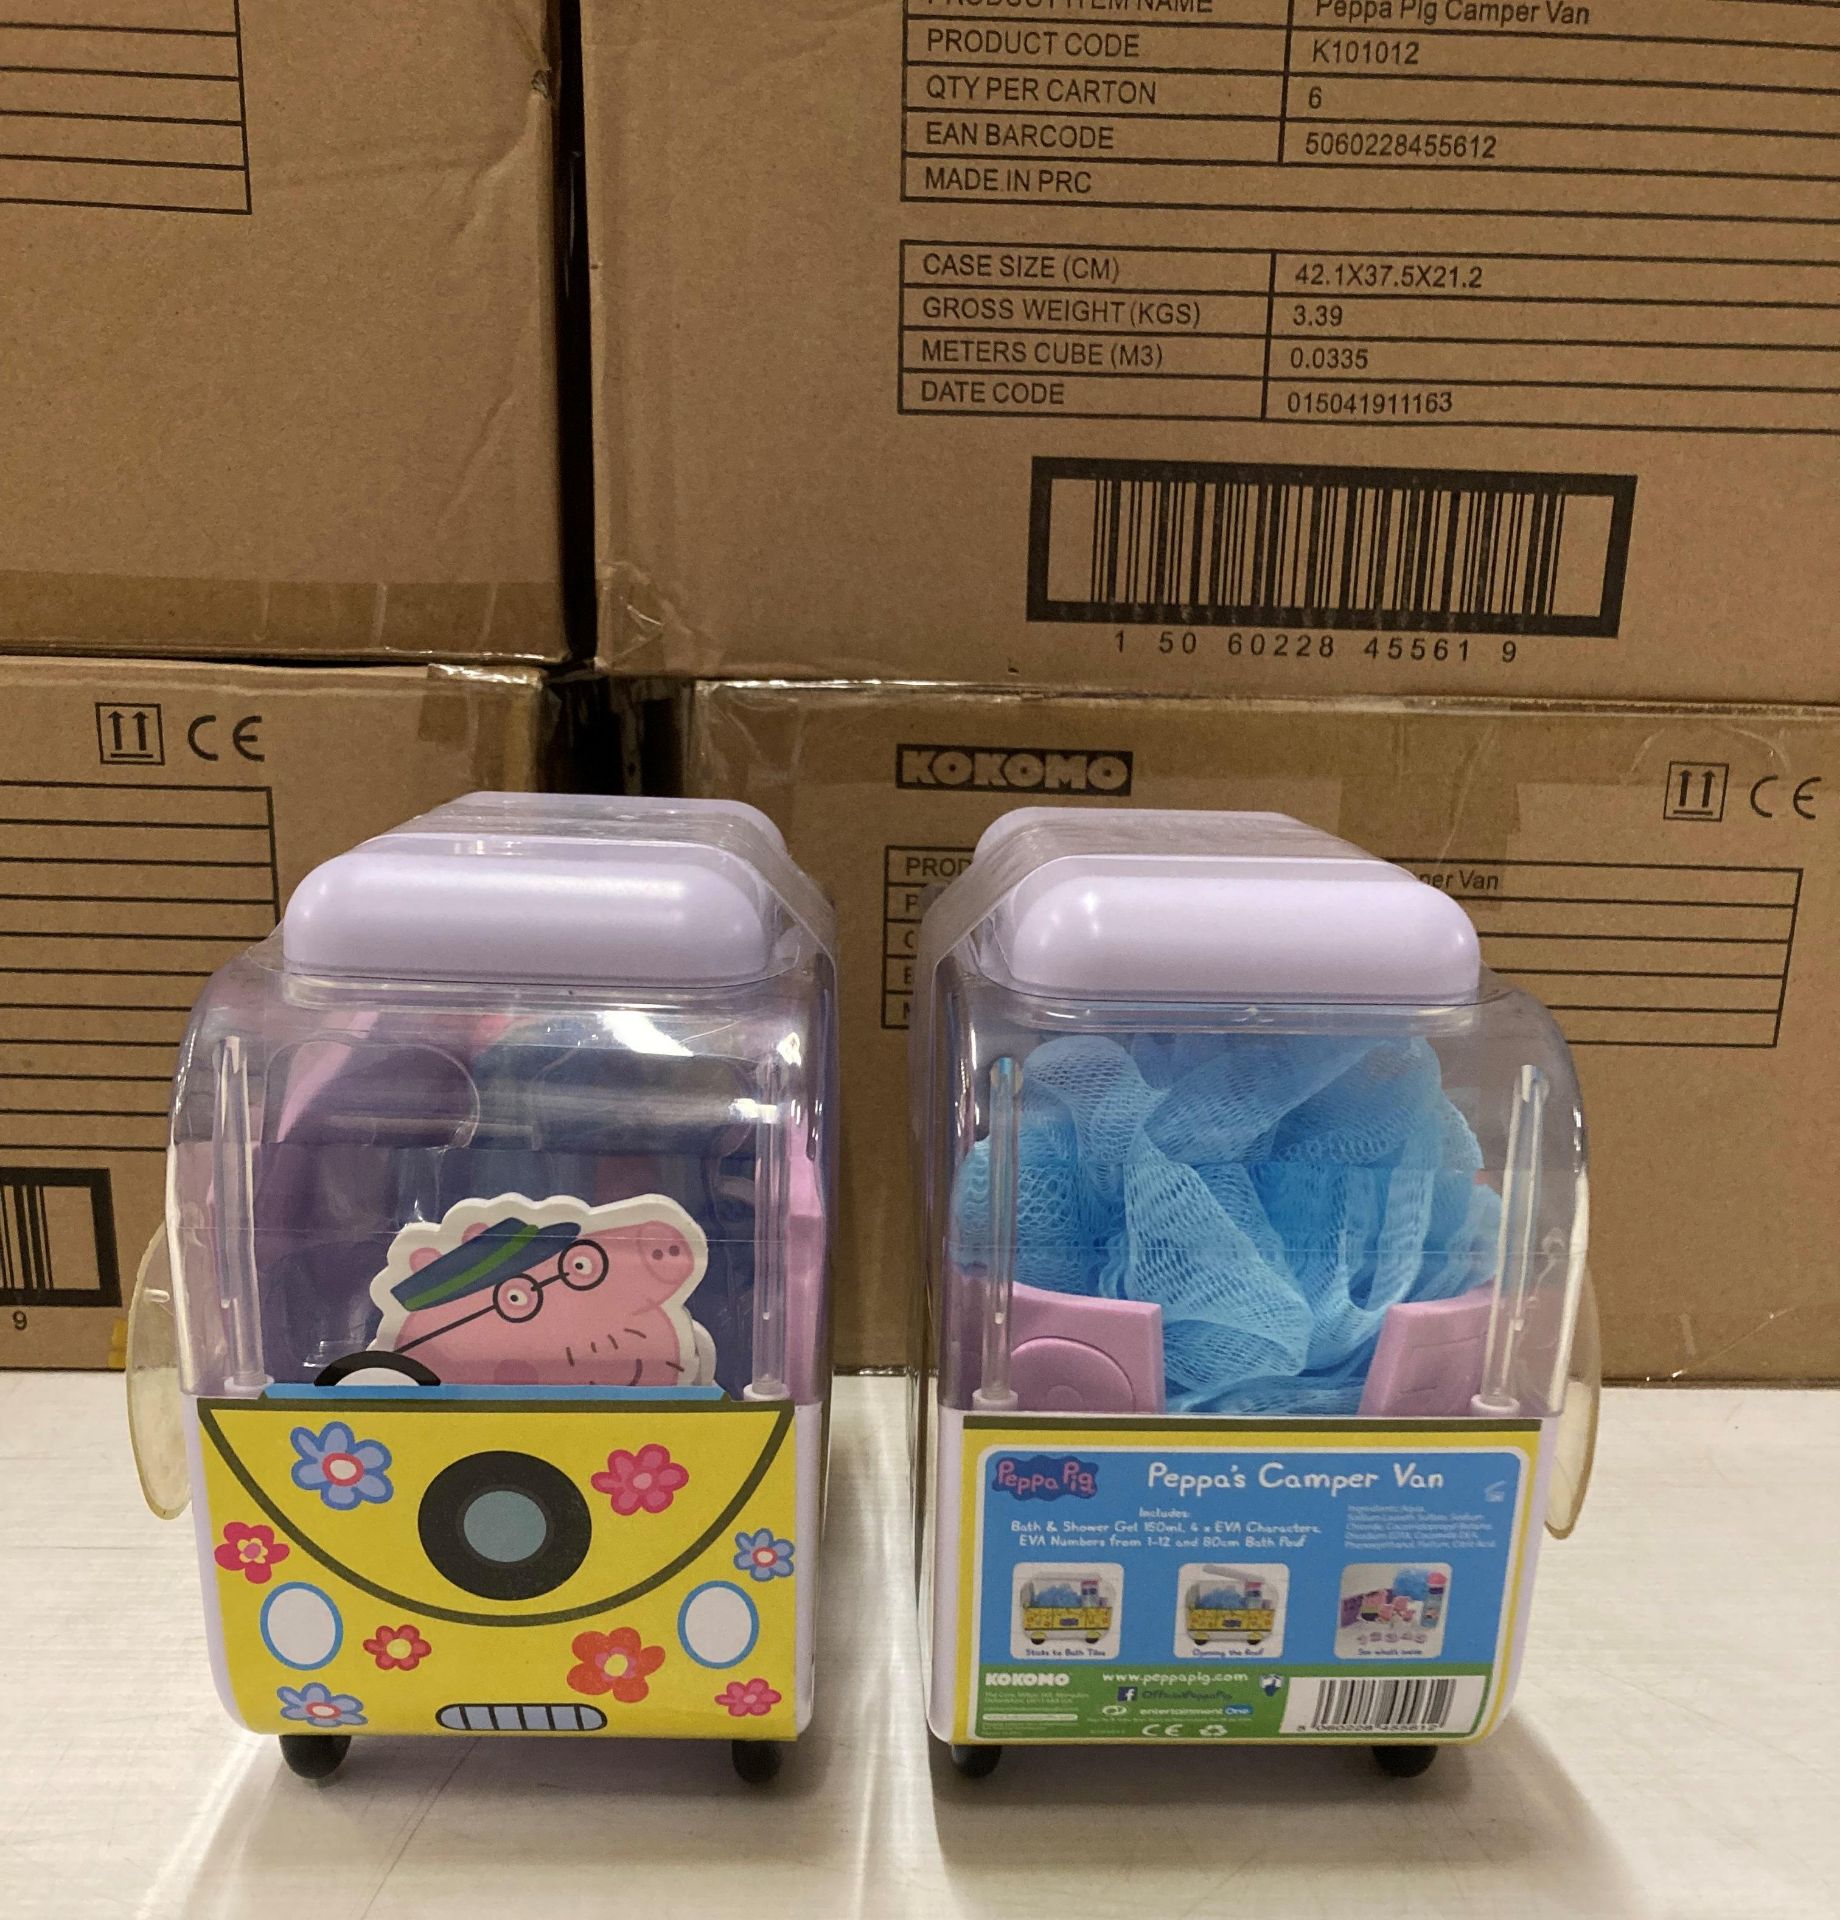 60 x Peppa Pig Campervan Bath Sets (with cut-out Peppa Pig characters, bath numbers, - Image 2 of 3